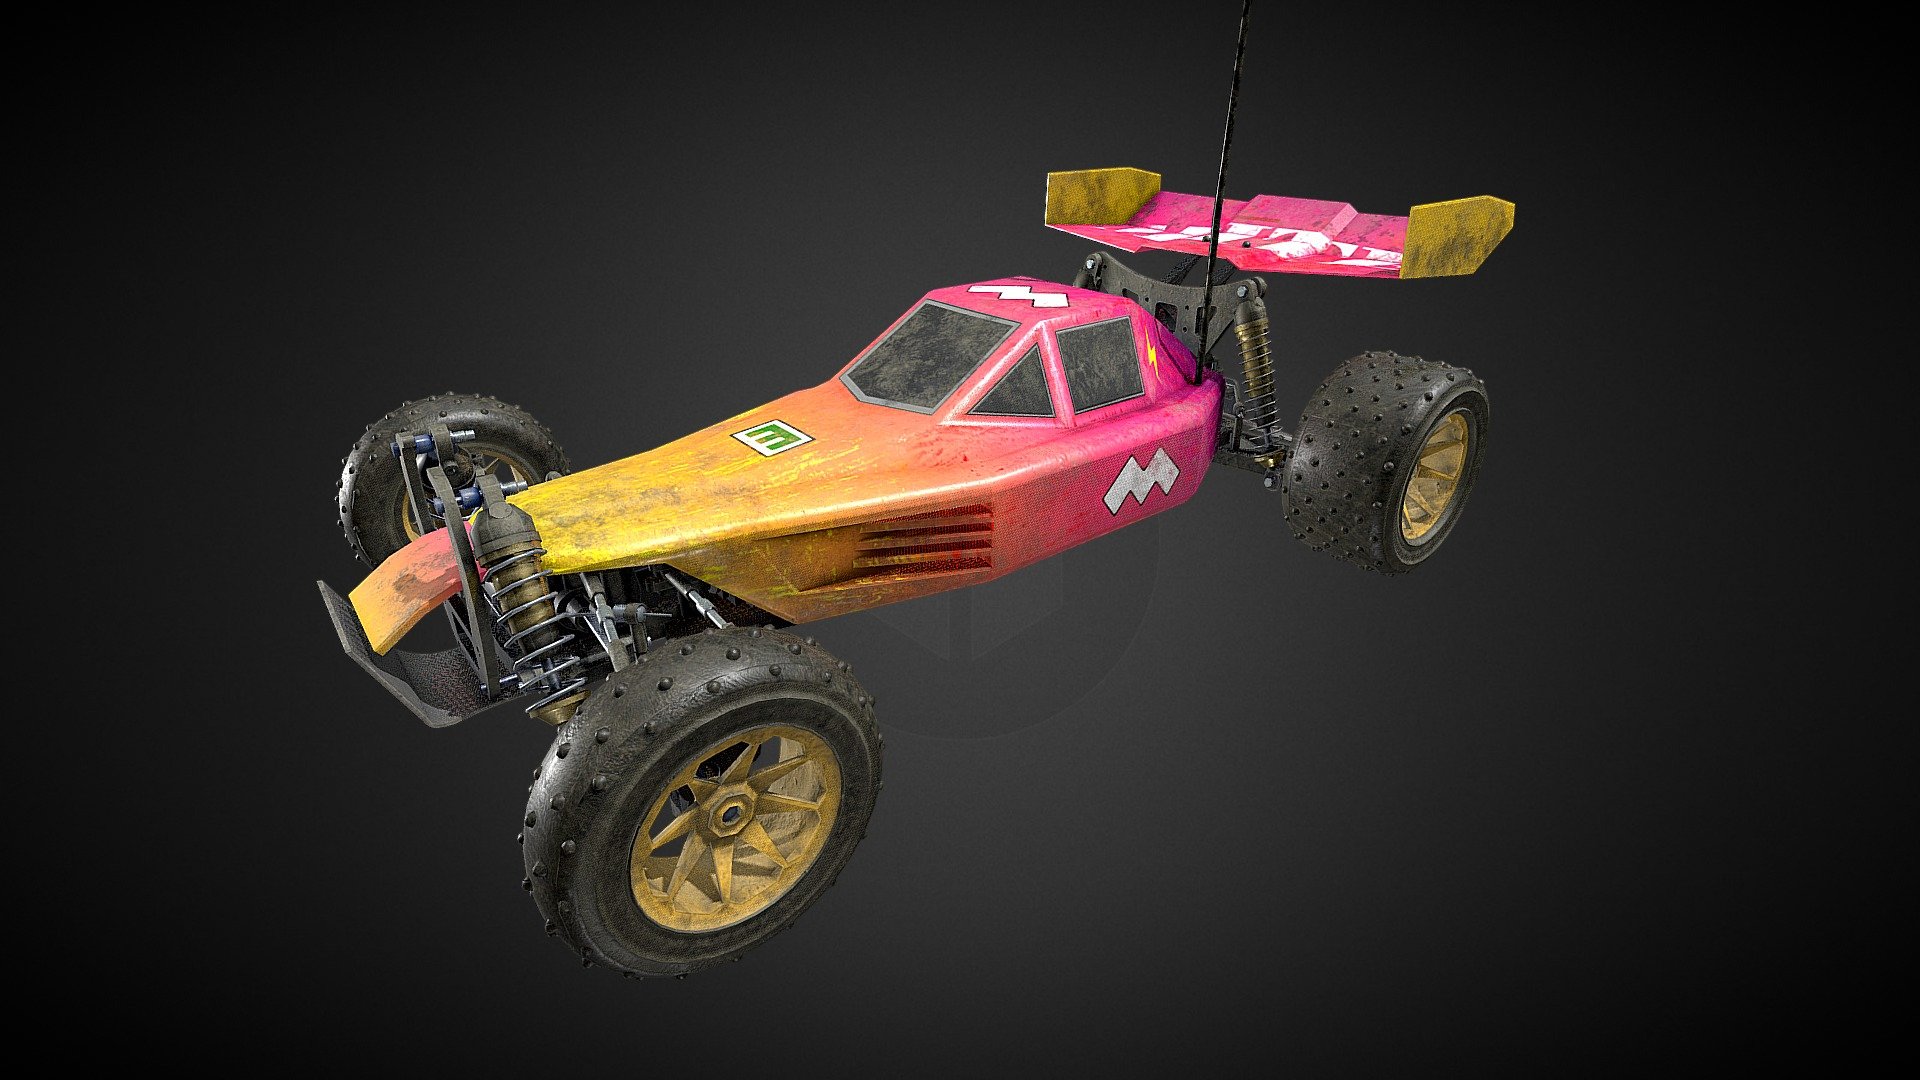 Tribute to the old-school RC car game Re-volt.
Modelled in 3dsmax
Textured in Substance Painter - Re-volt Dusty mite (Dusty) - 3D model by dworak92 3d model